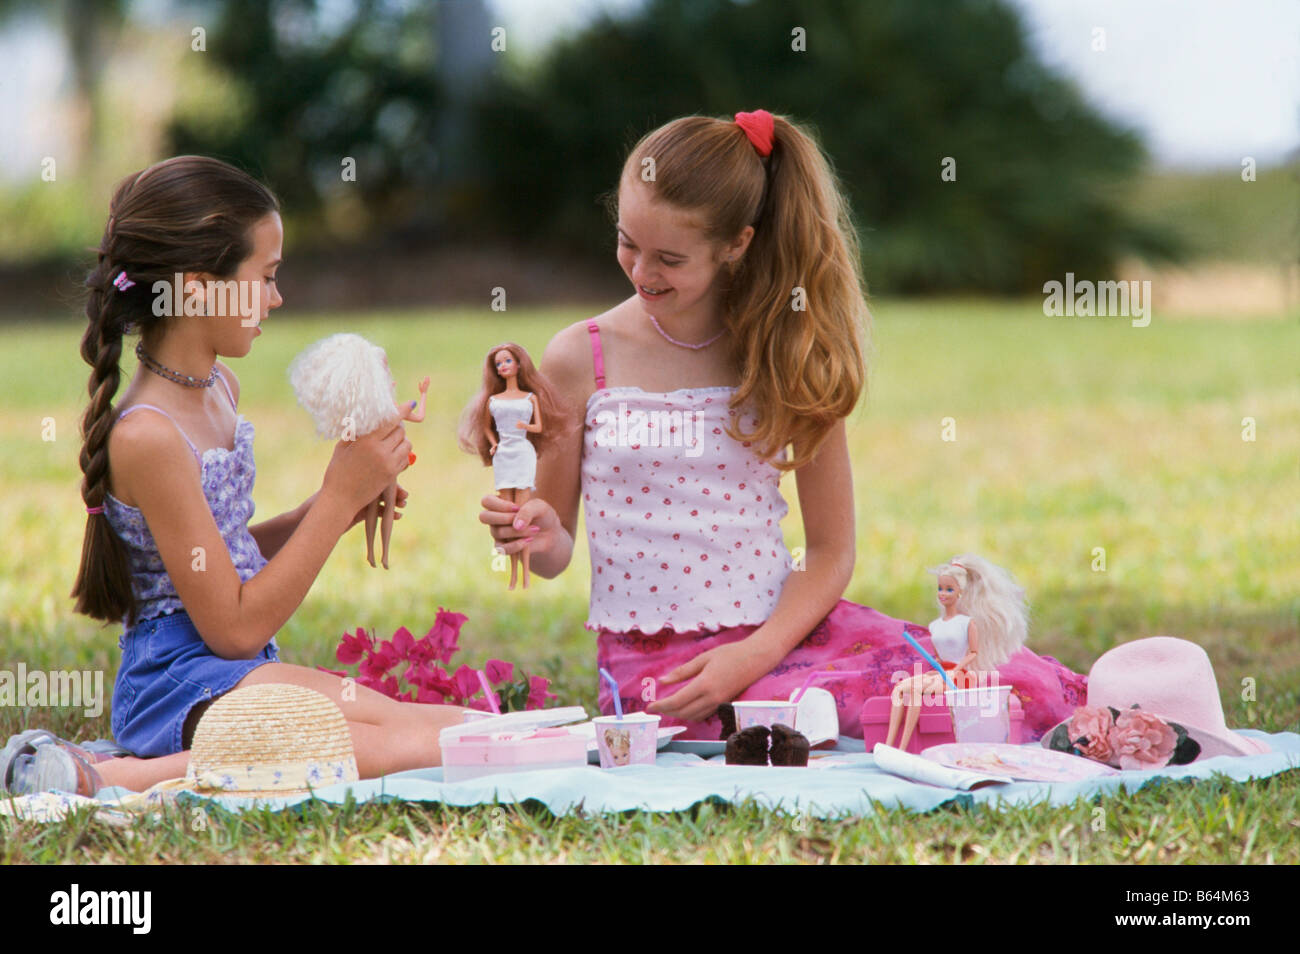 Young girls playing barbie dolls together Stock Photo - Alamy